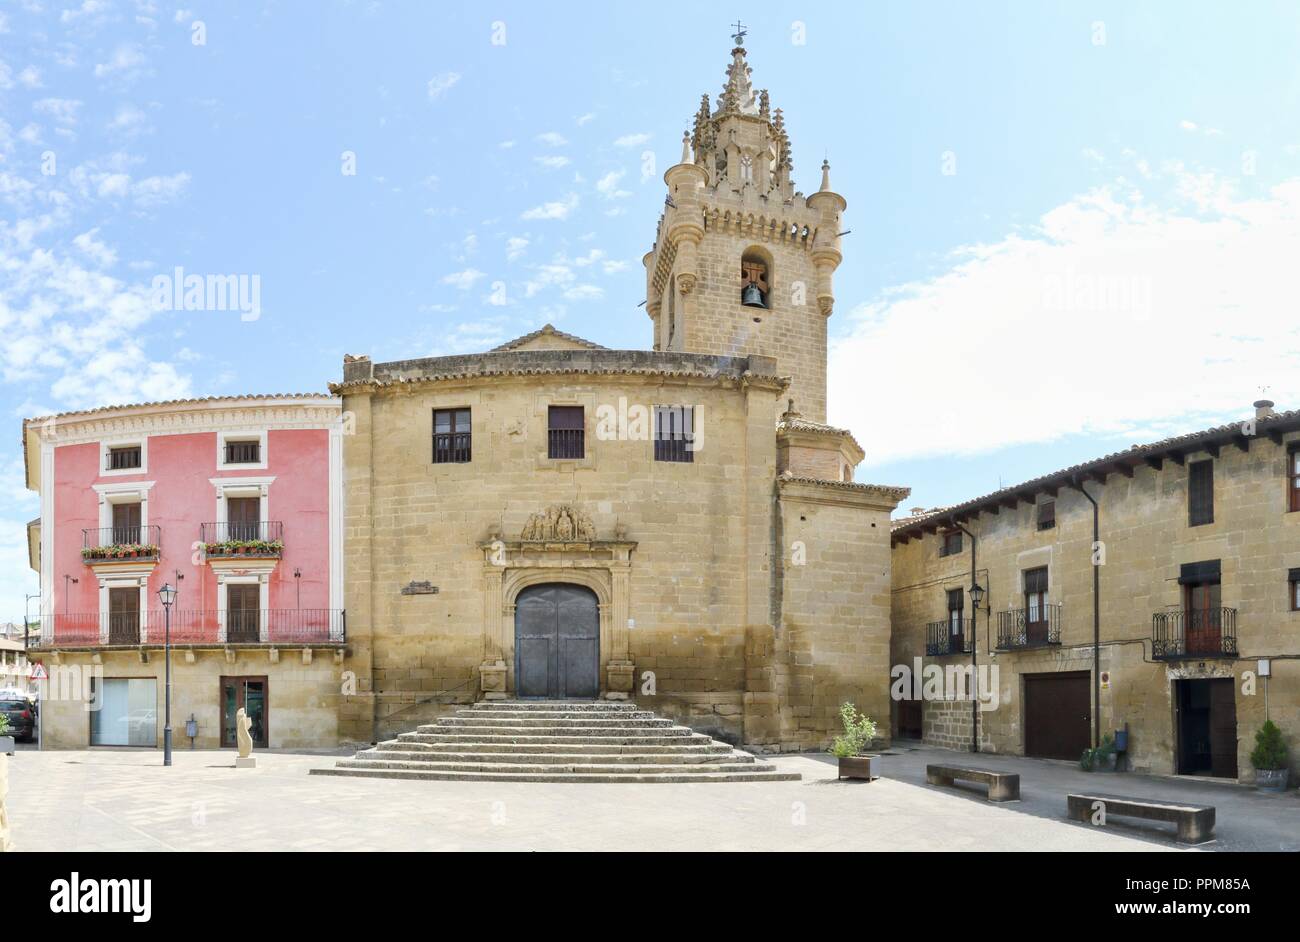 The brick made Holy Mary Church (Iglesia de Santa Maria) with bell tower and Plaza del Olmo square in front of it, in Uncastillo, Spain Stock Photo